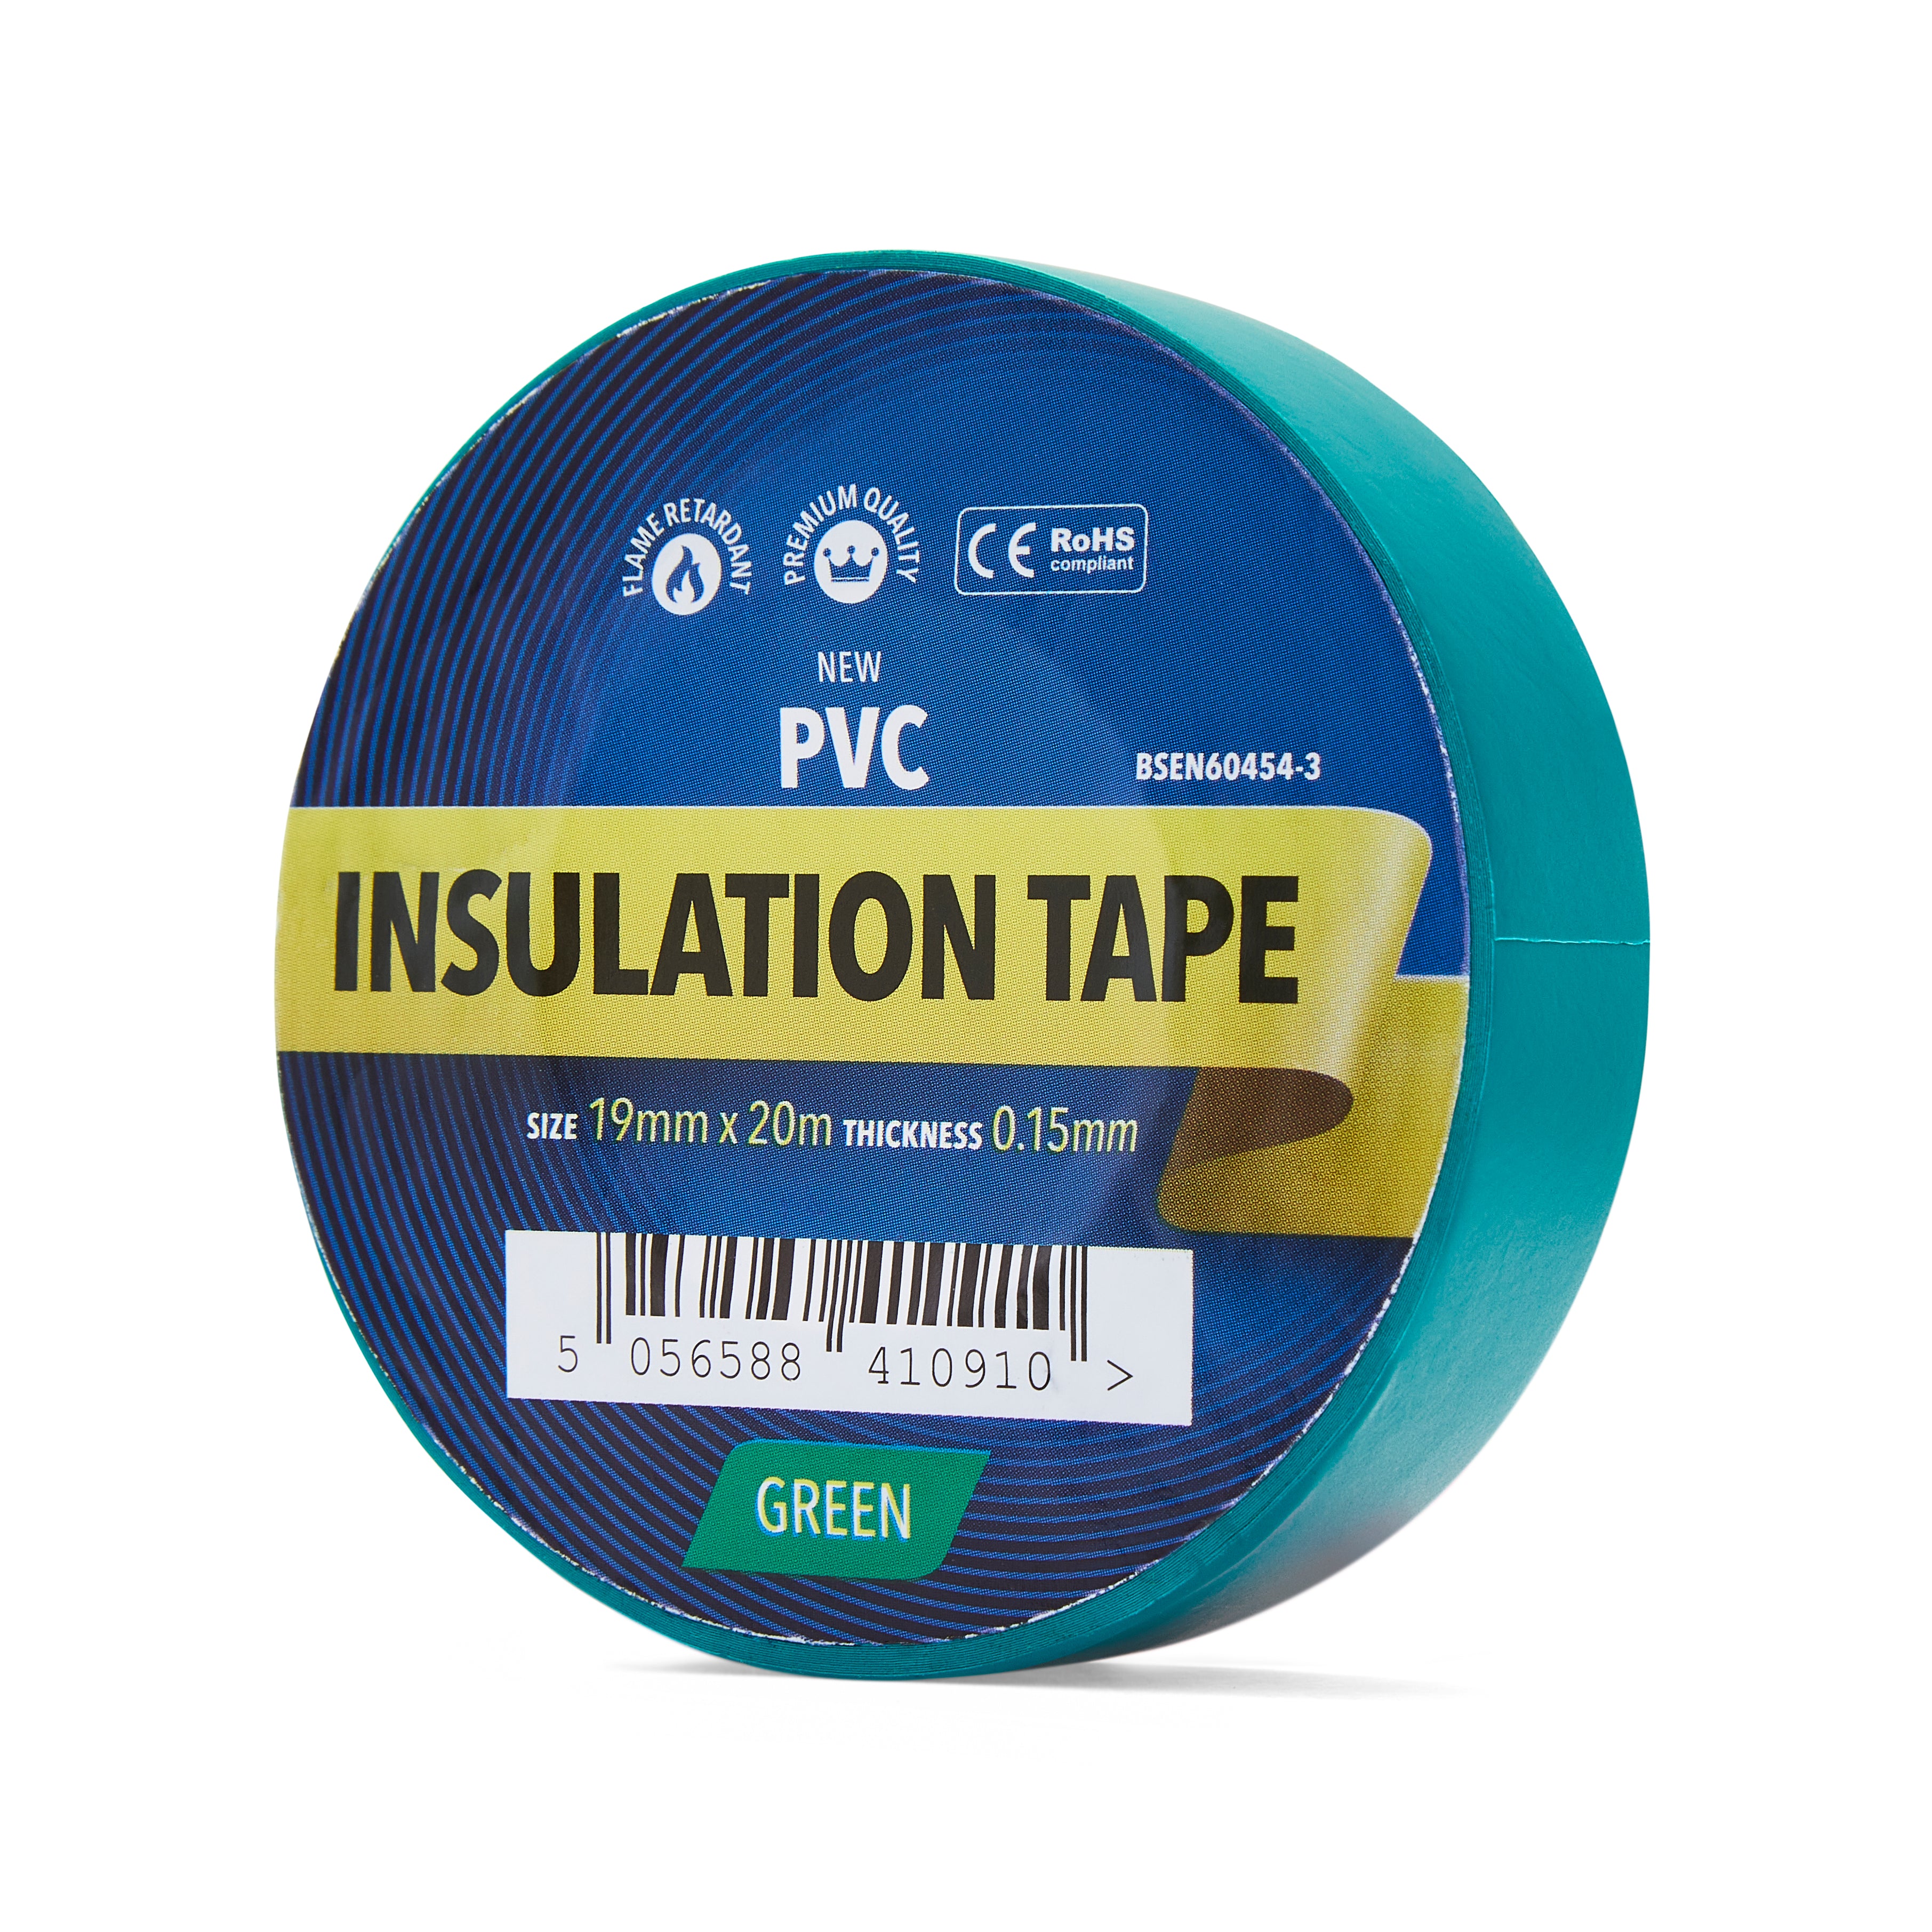 Green Electrical Tape 19mm - PVC Insulation Tape